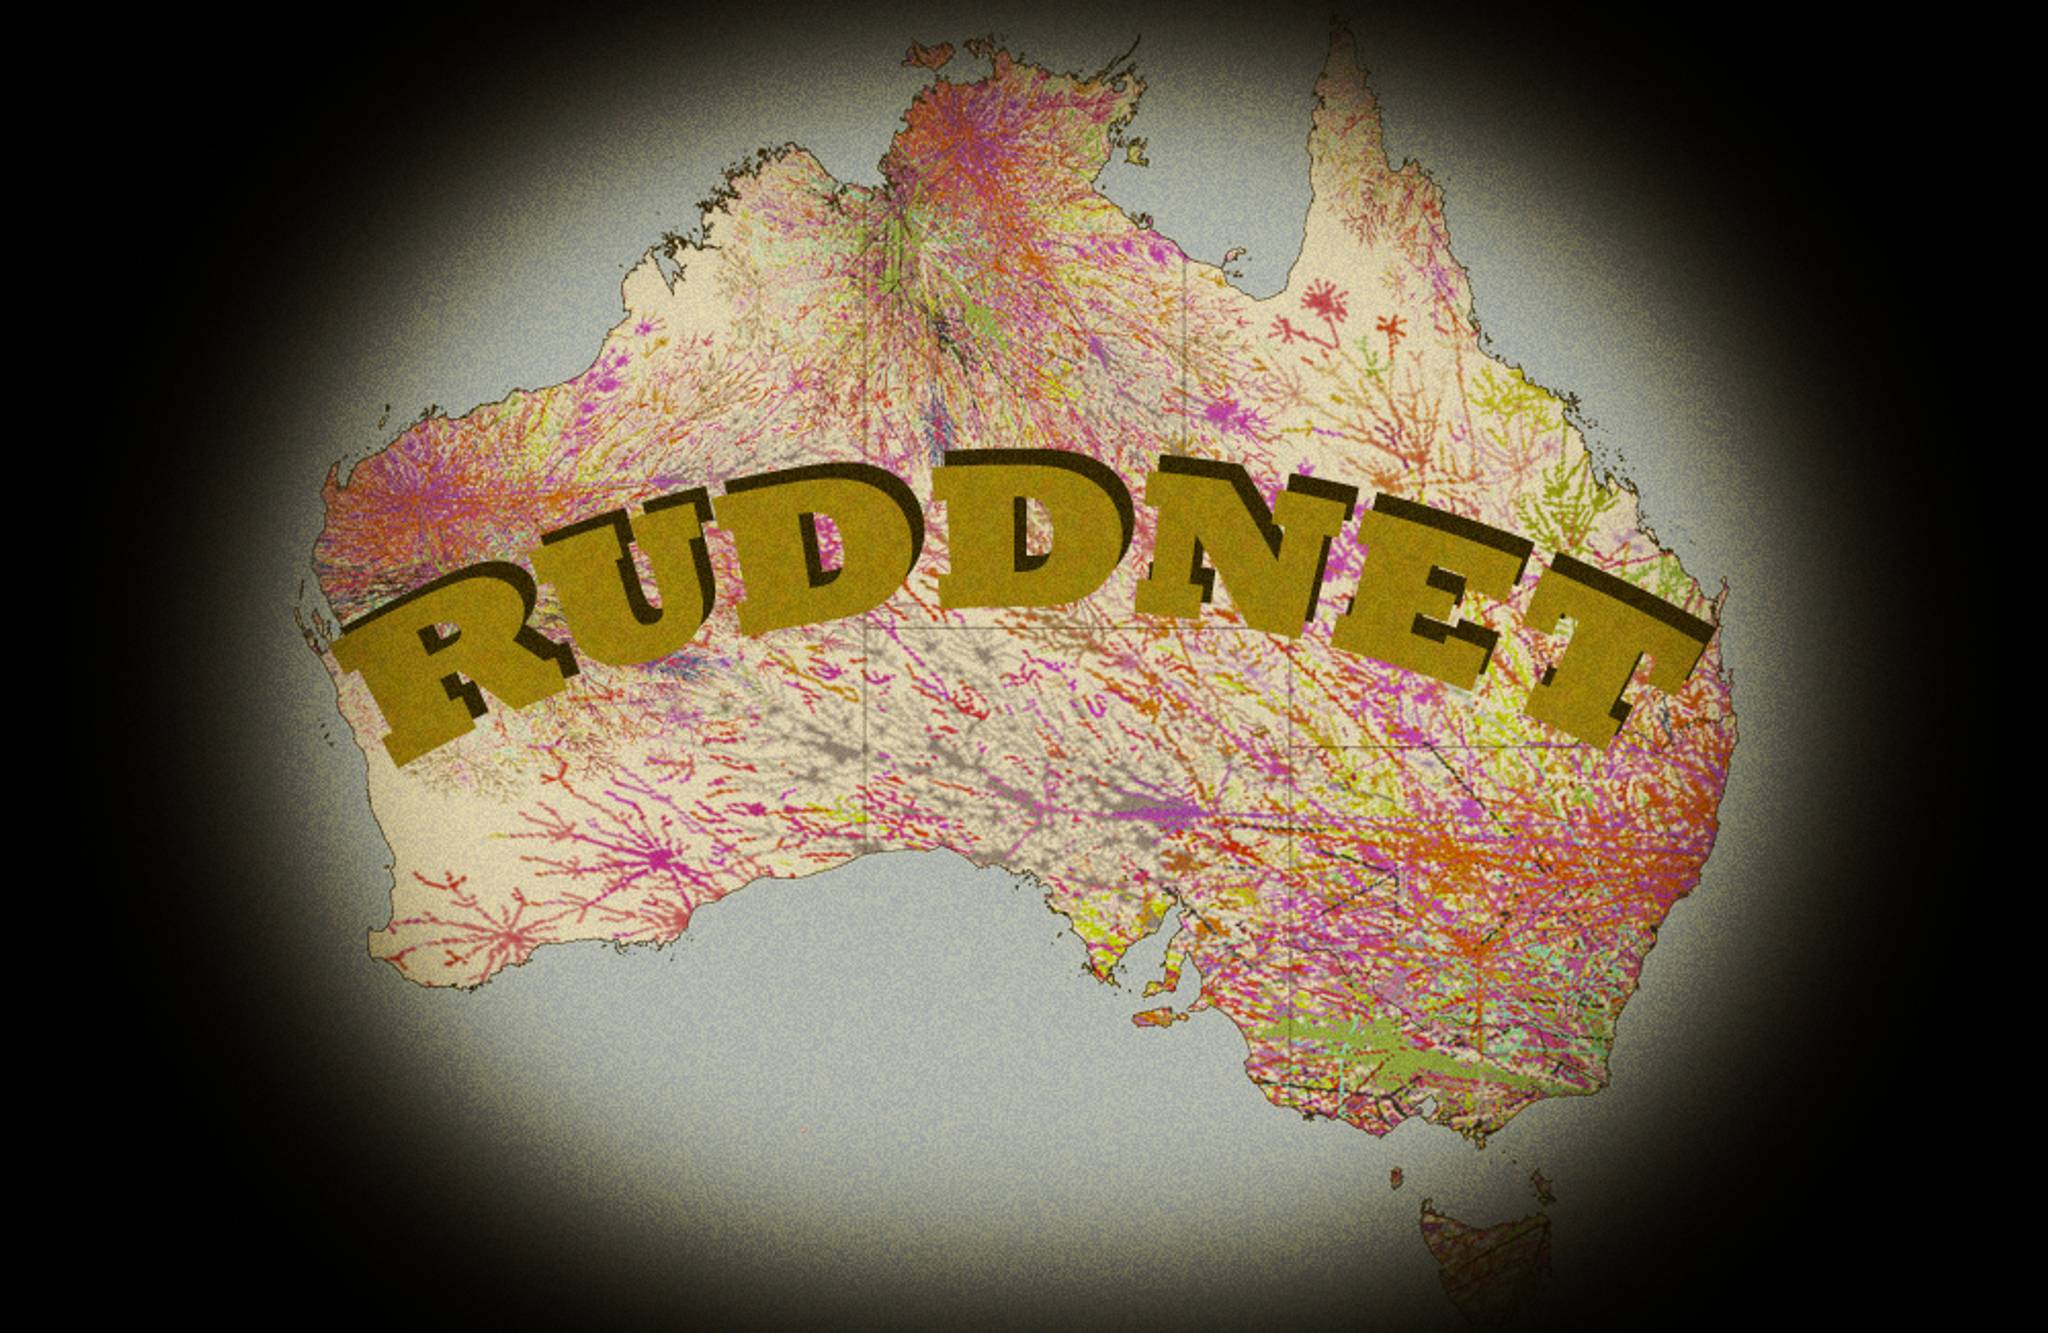 Ruddnet: the outback superhighway